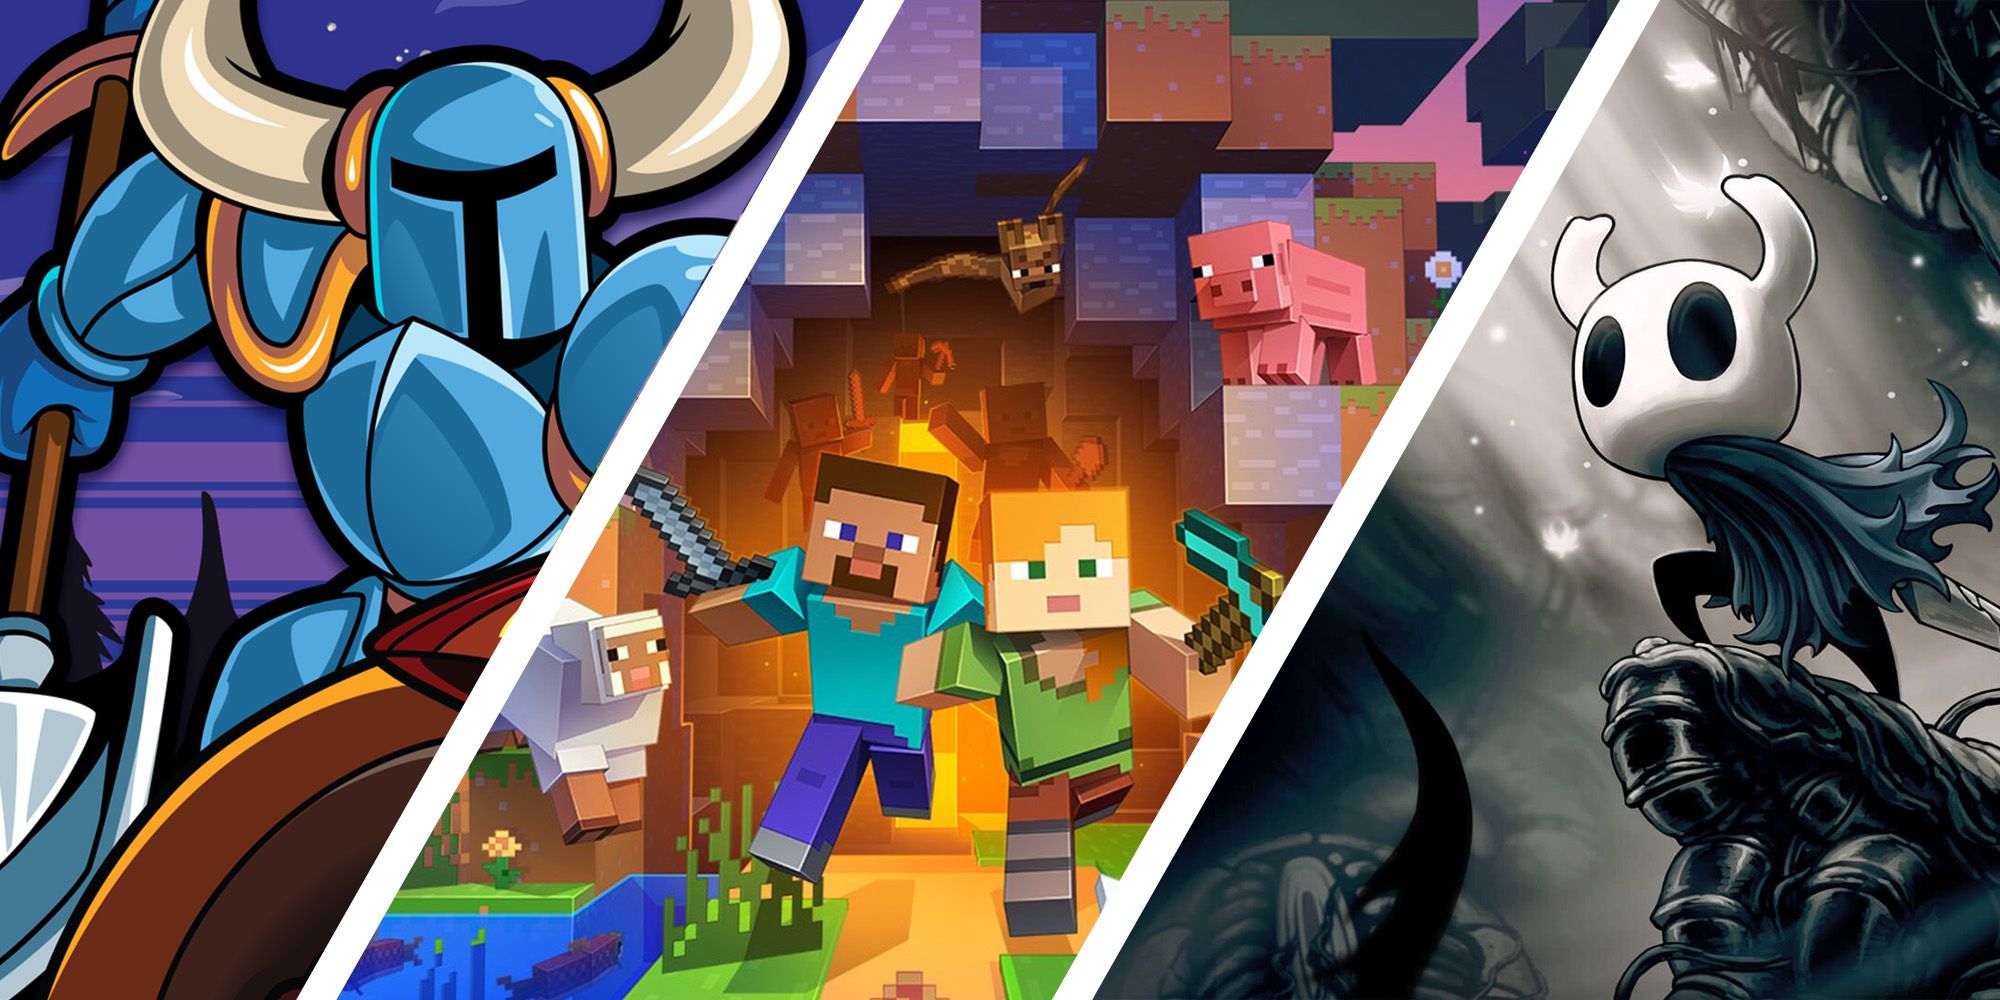 Minecraft characters surrounded by Shovel Knight and Hollow Knight